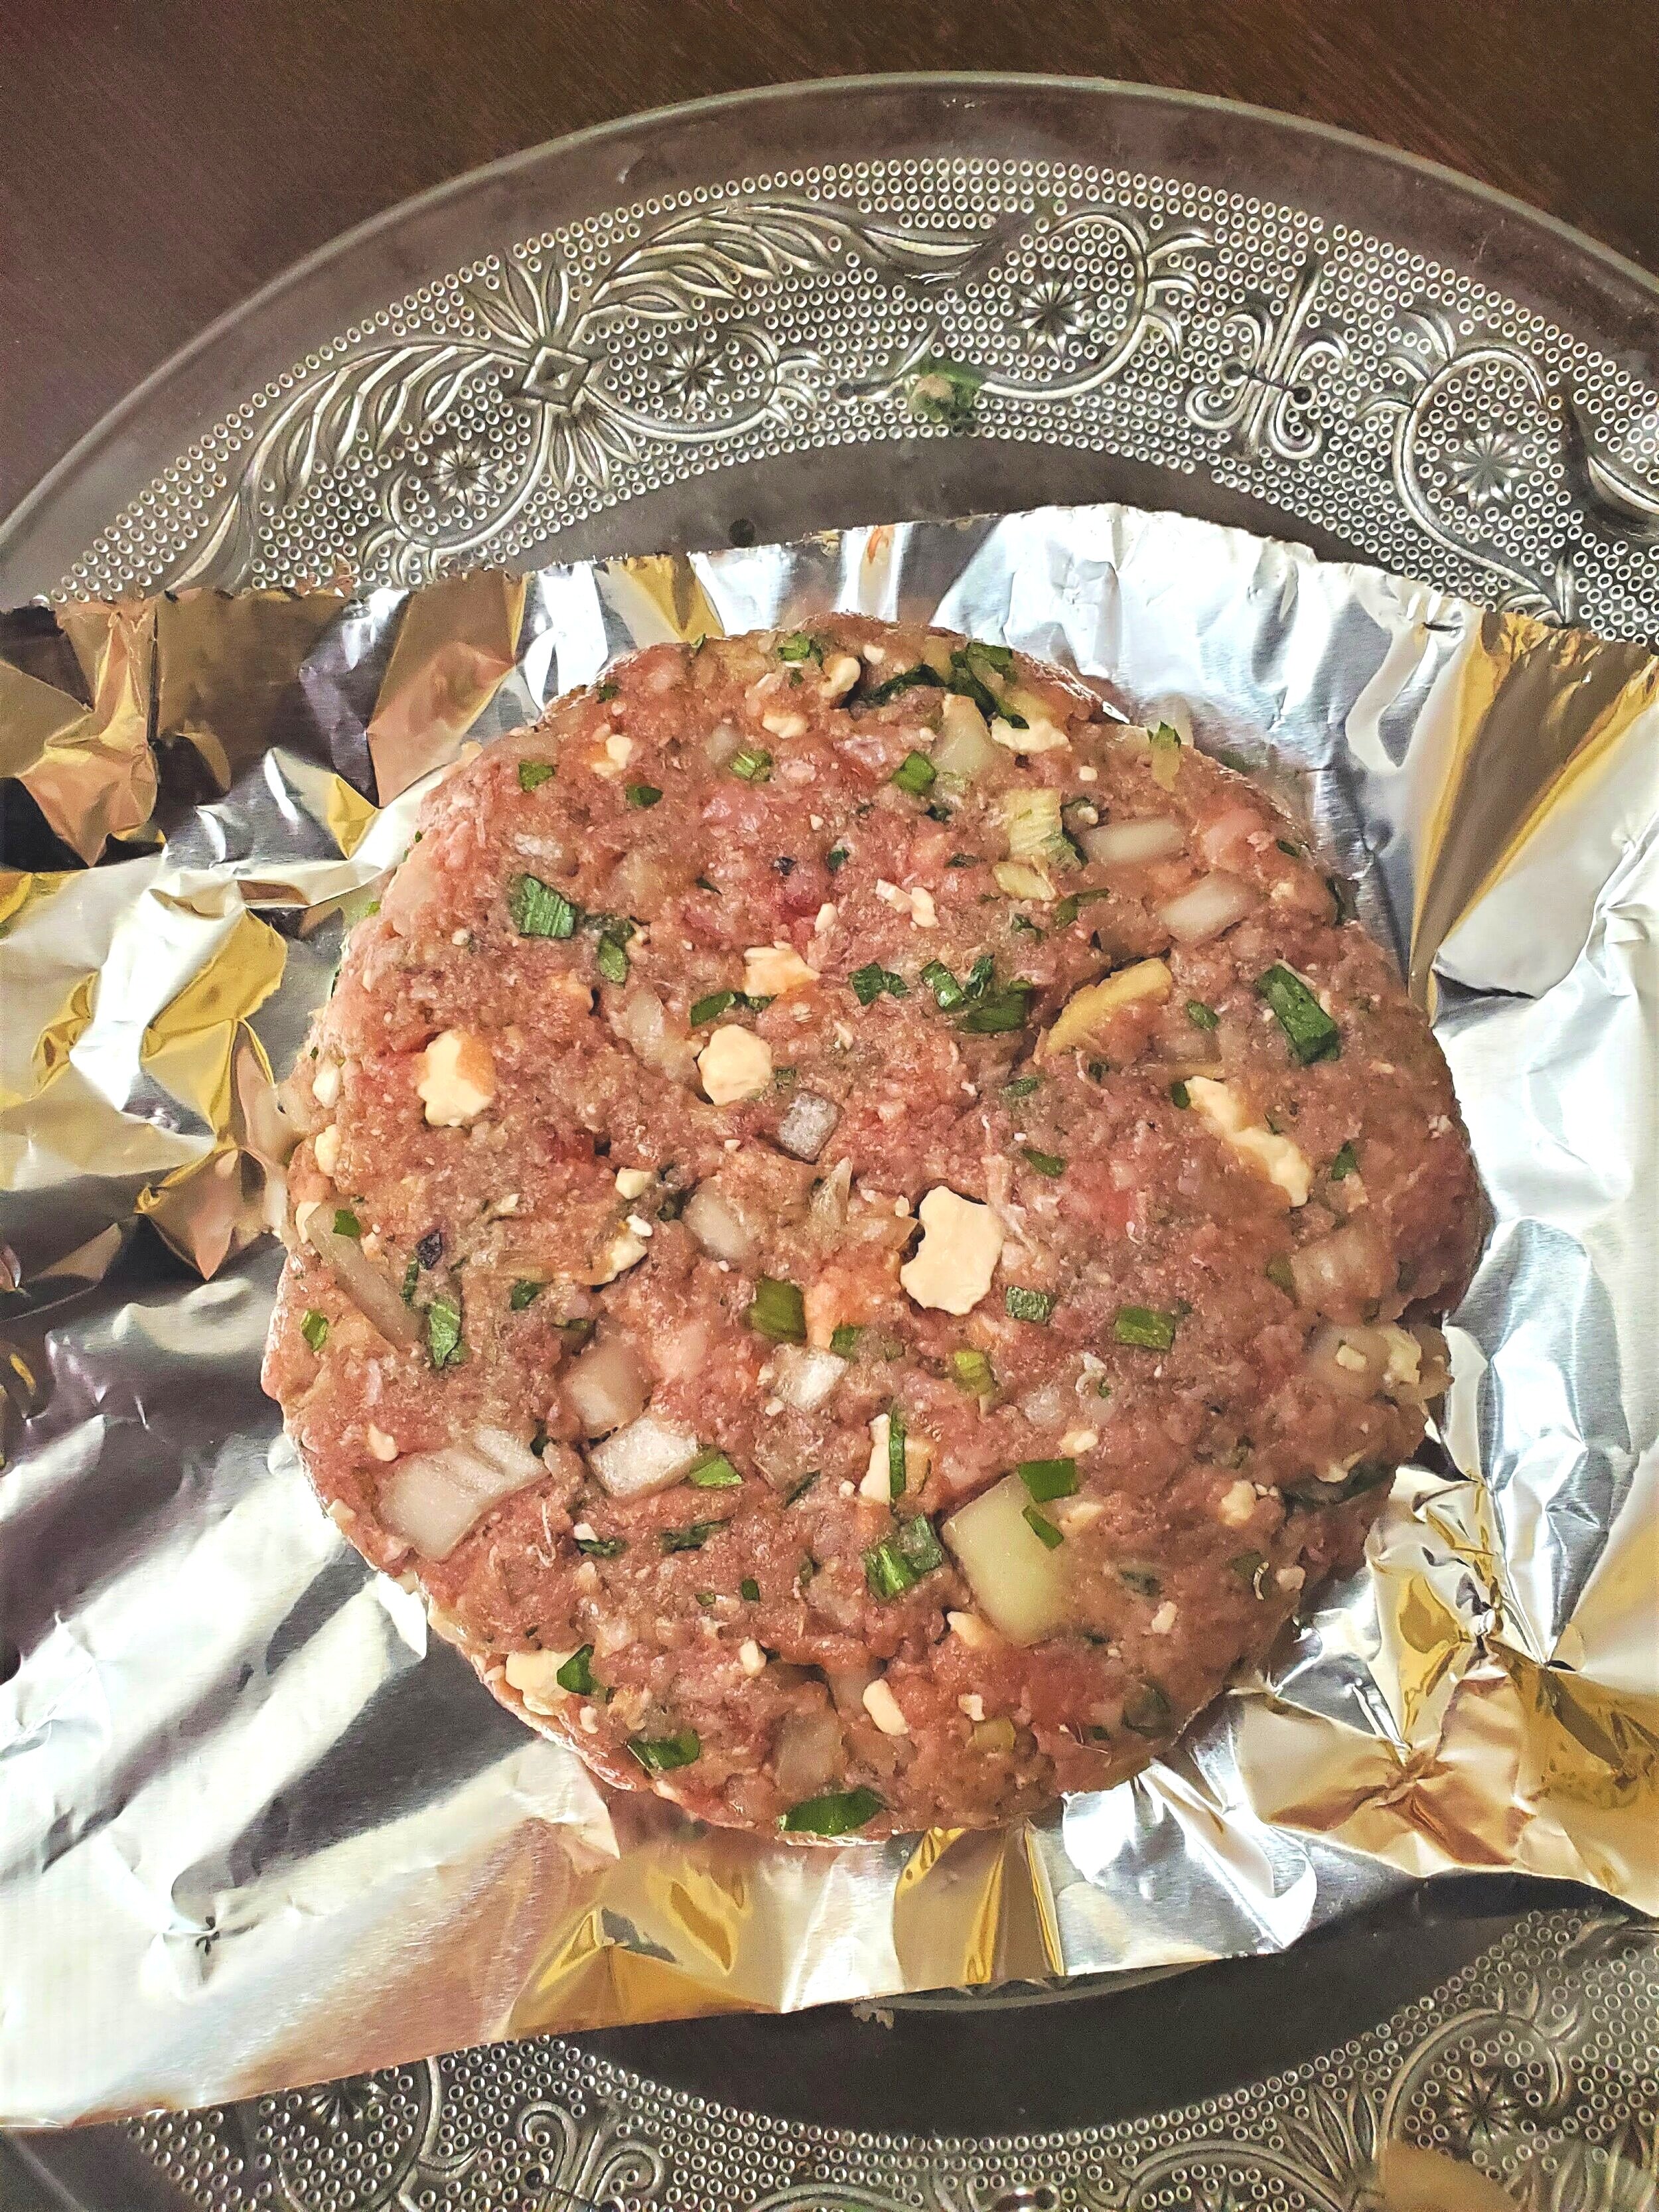 Shape your burgers and place on a foil.